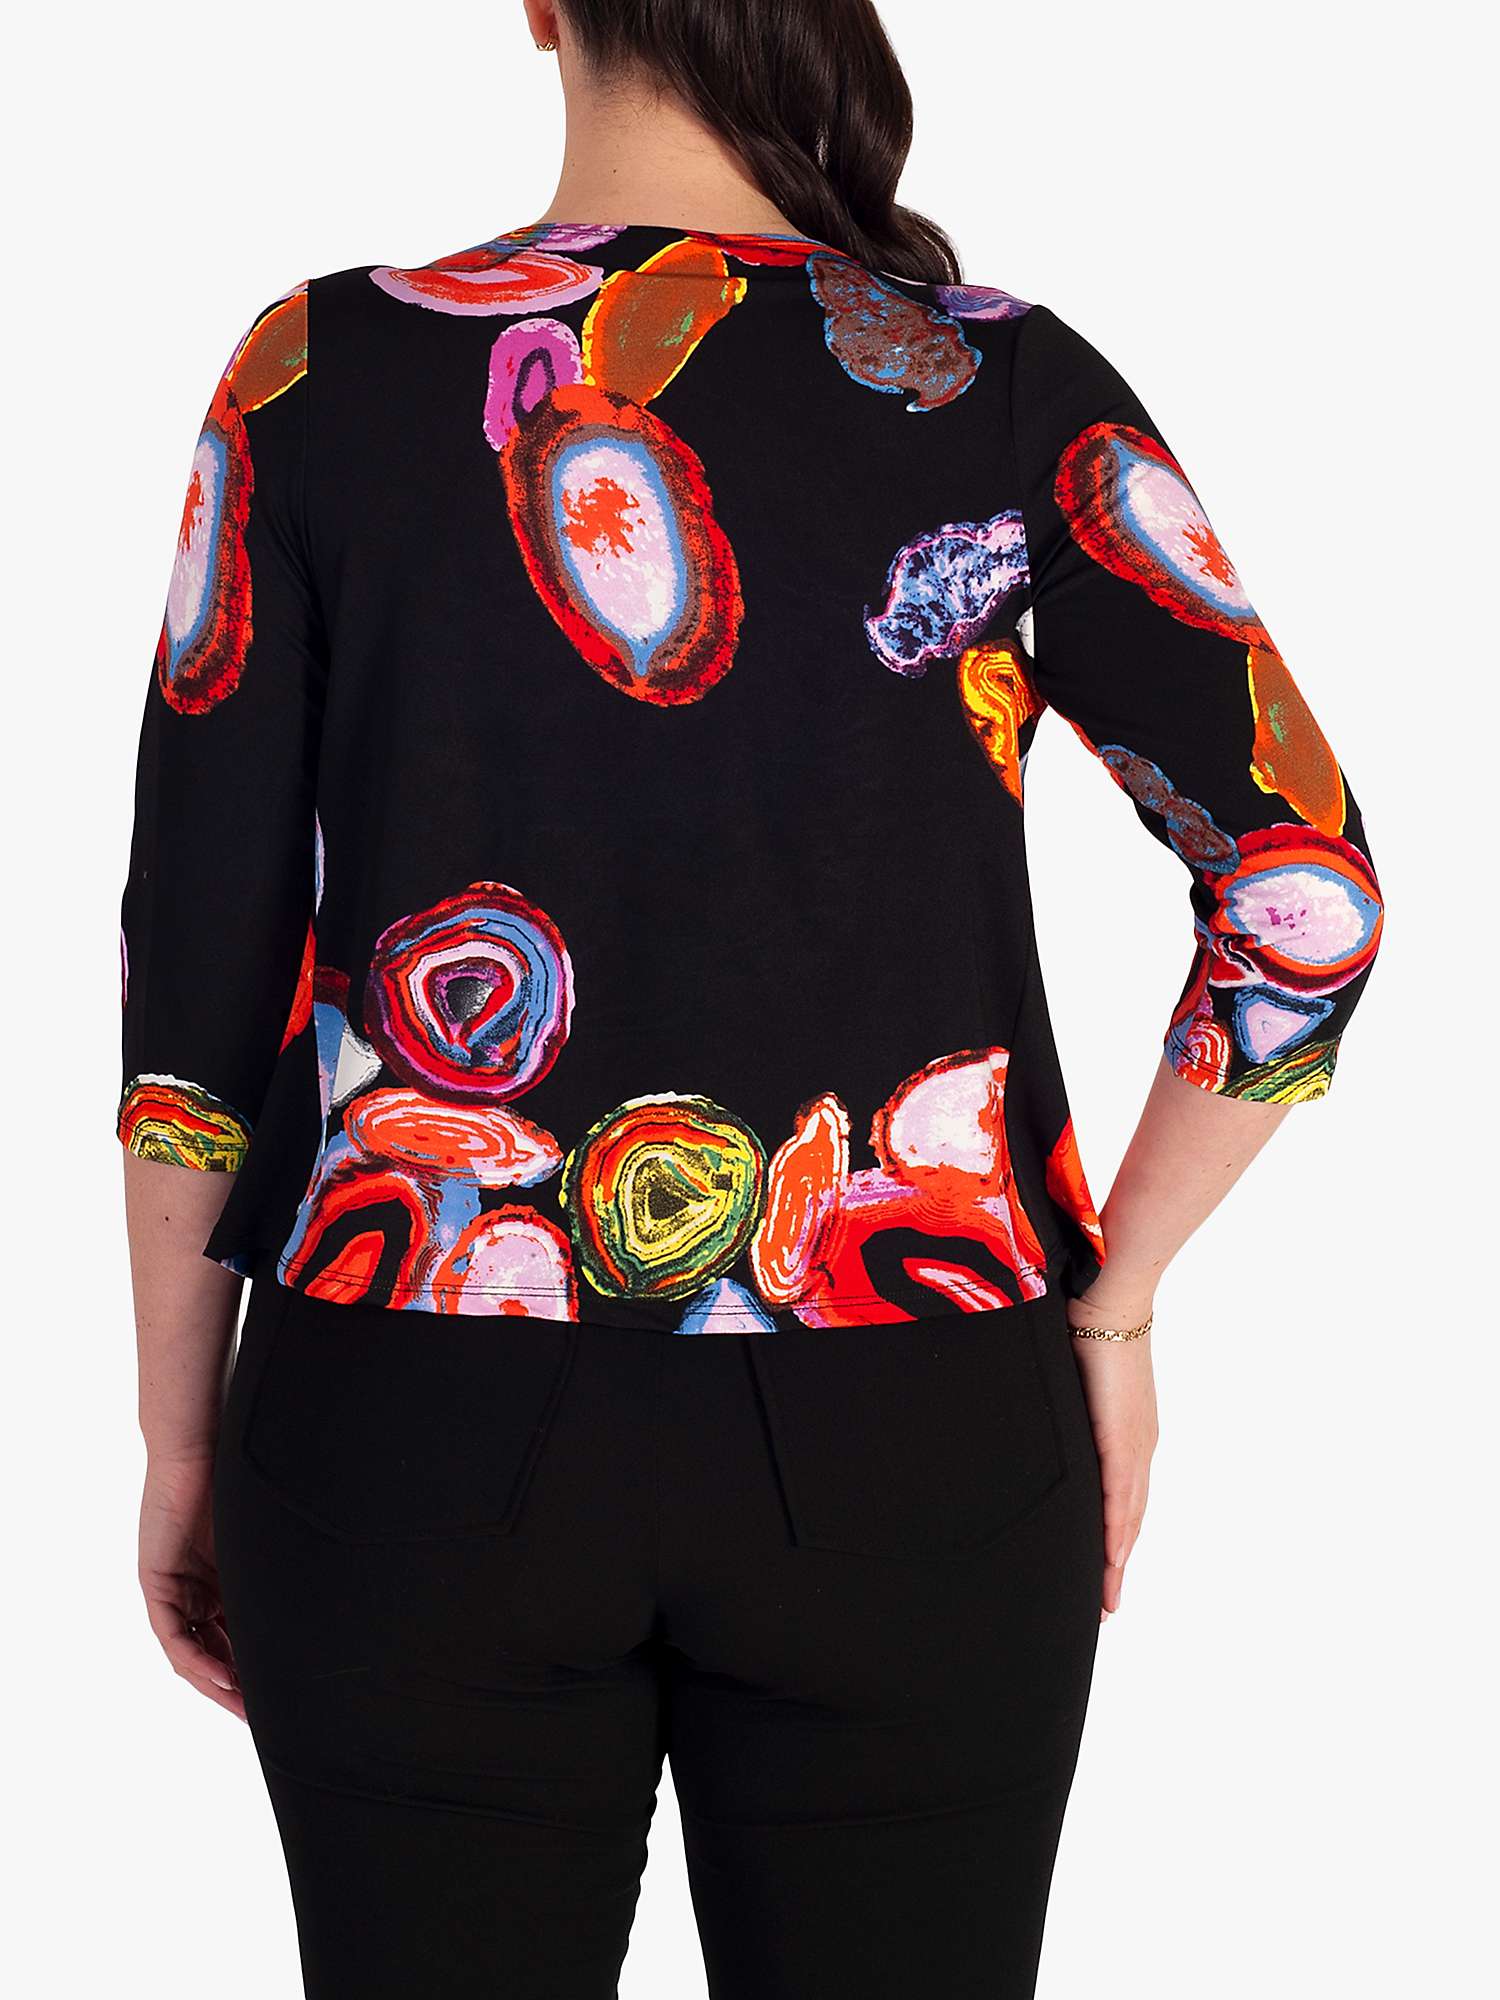 Buy chesca Abstract Print Bolero Jacket Online at johnlewis.com